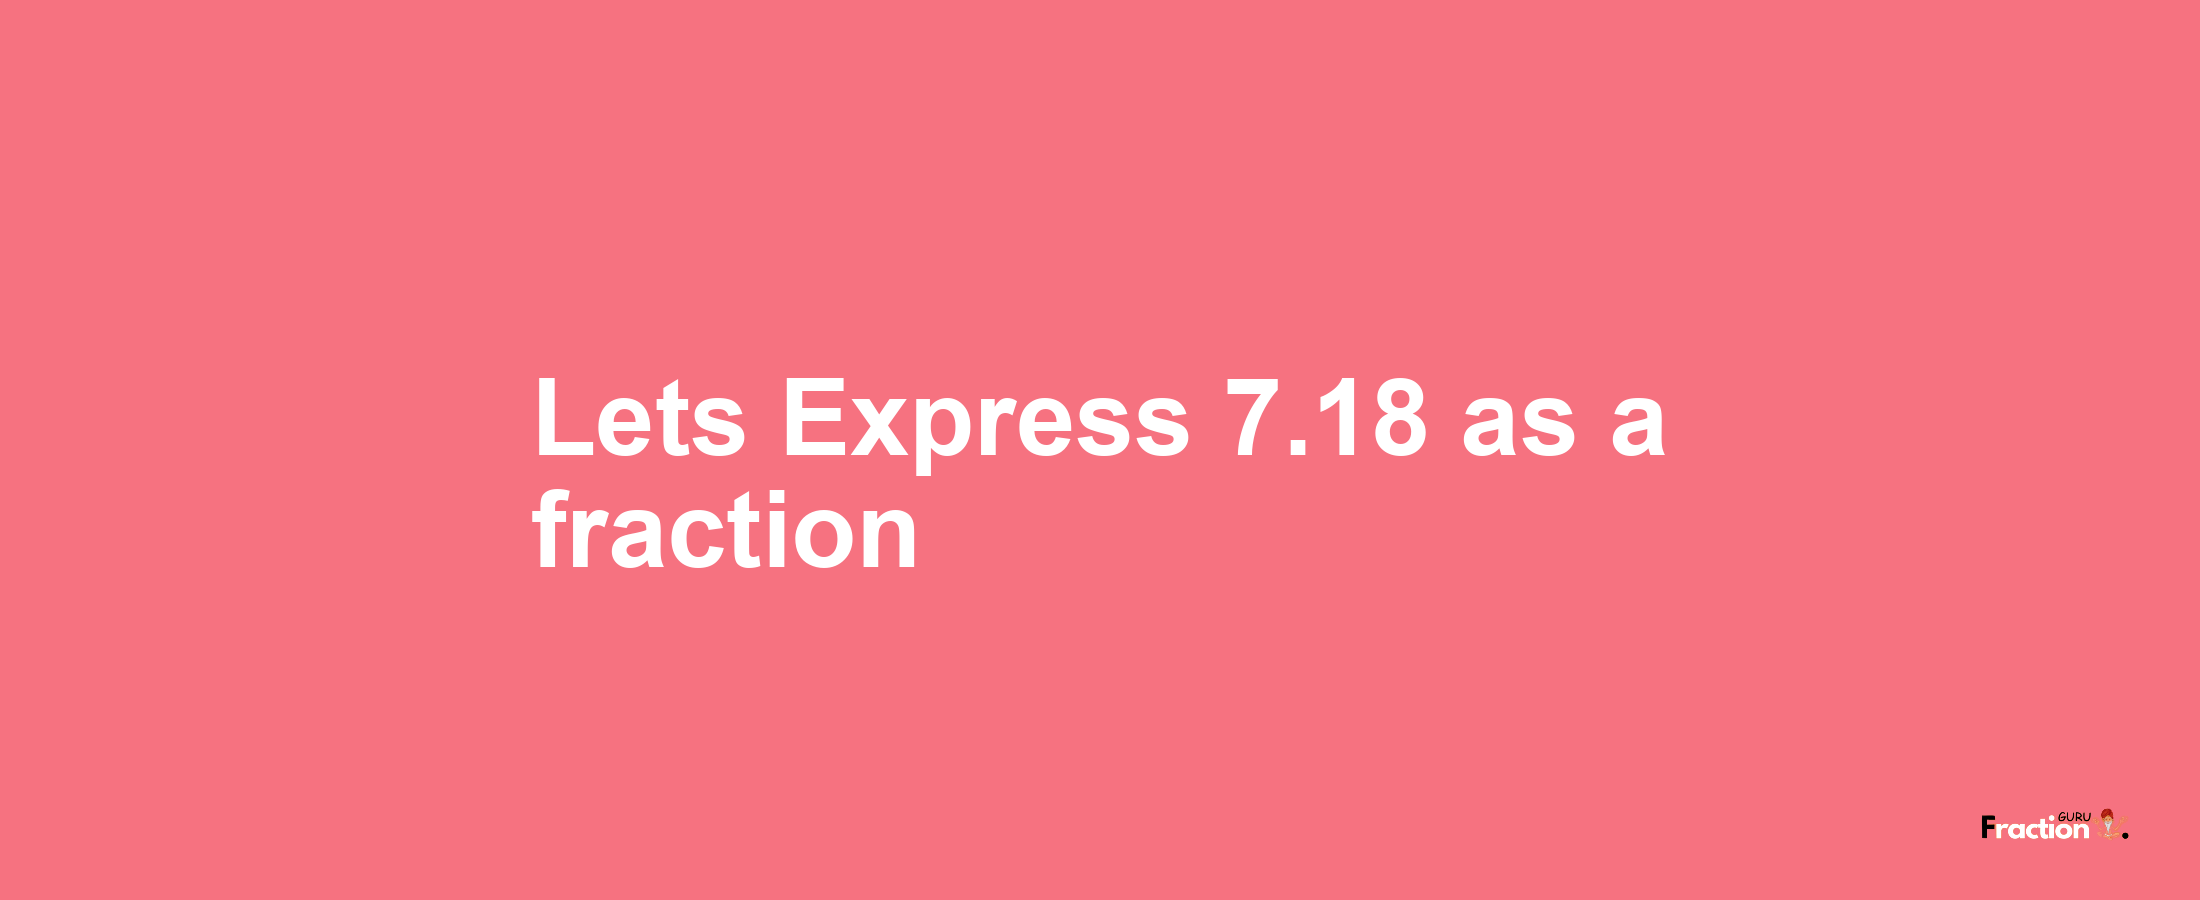 Lets Express 7.18 as afraction